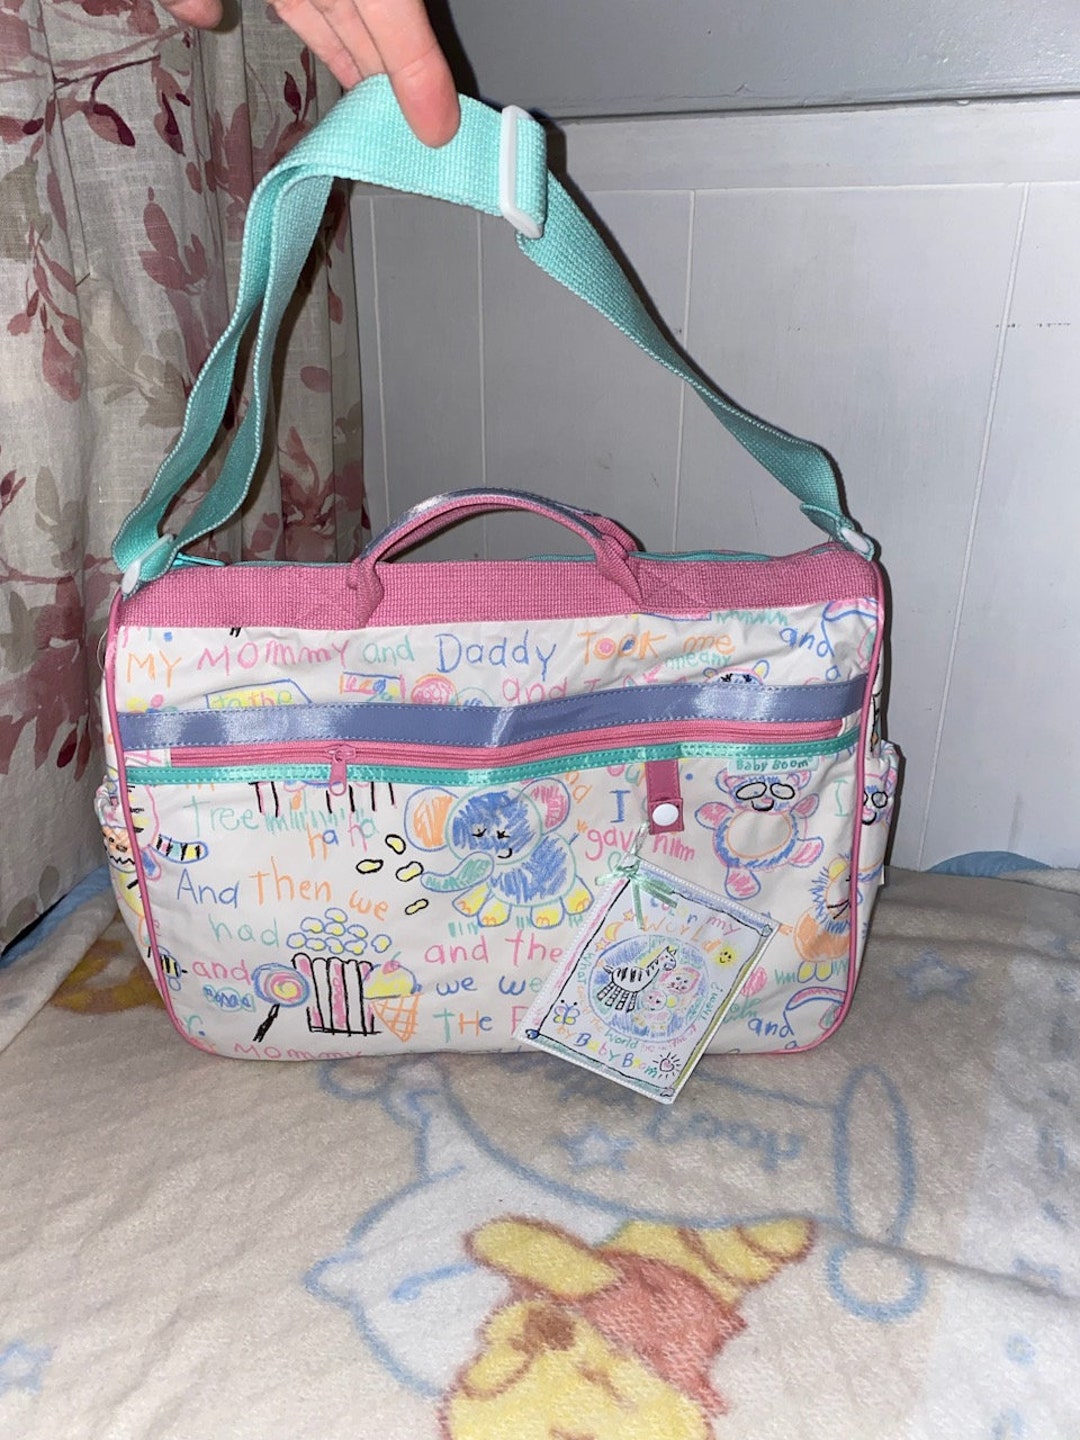 Vintage Baby Boom Diaper Bag Mommy and Daddy Took Me to the Zoo Mint ...